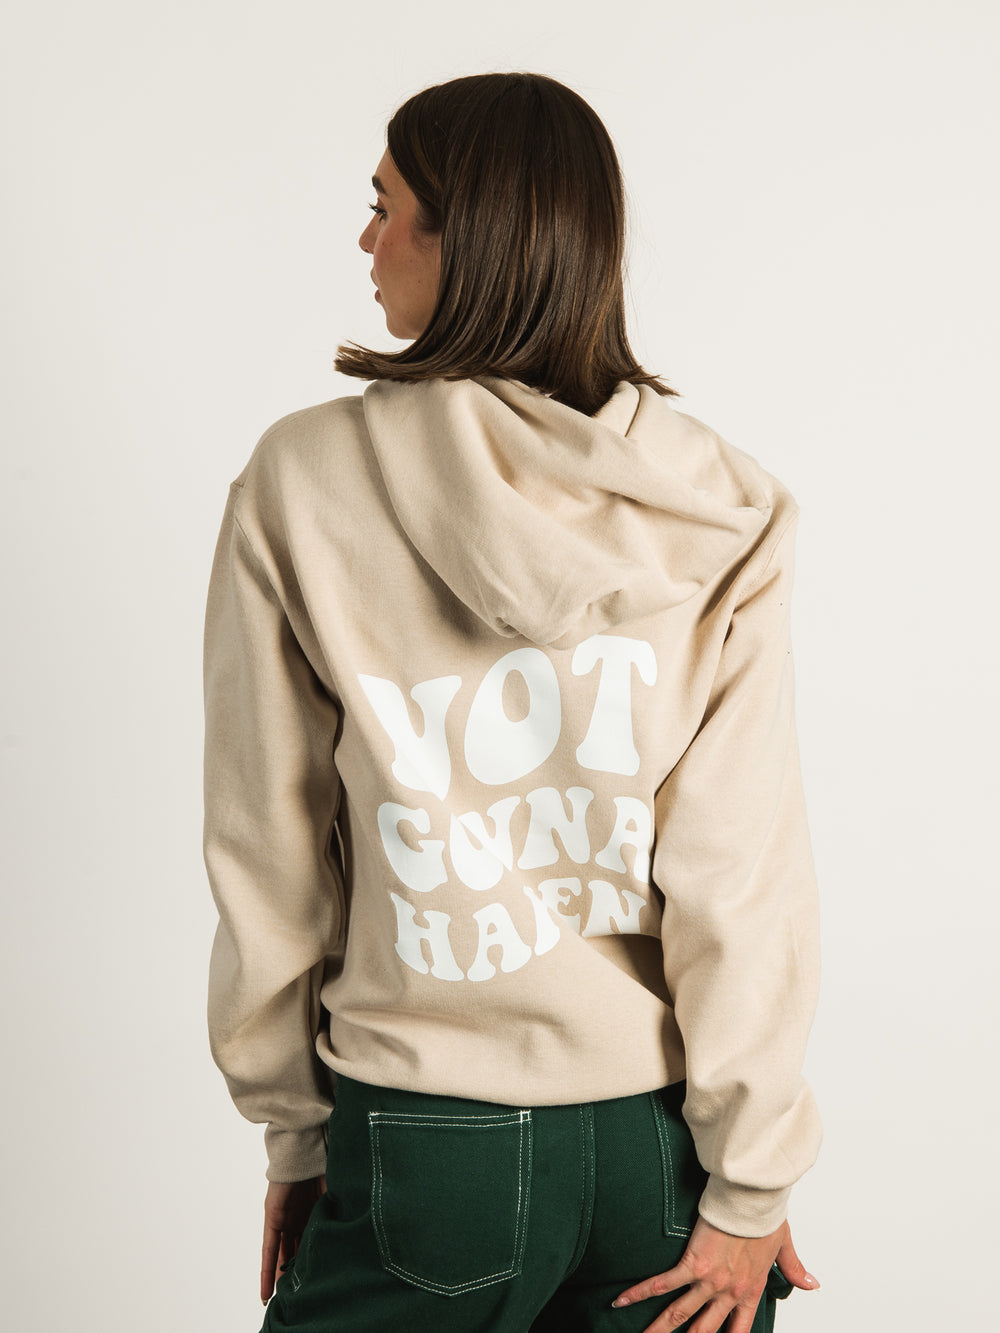 NOT GONNA HAPPEN HOODIE  - CLEARANCE